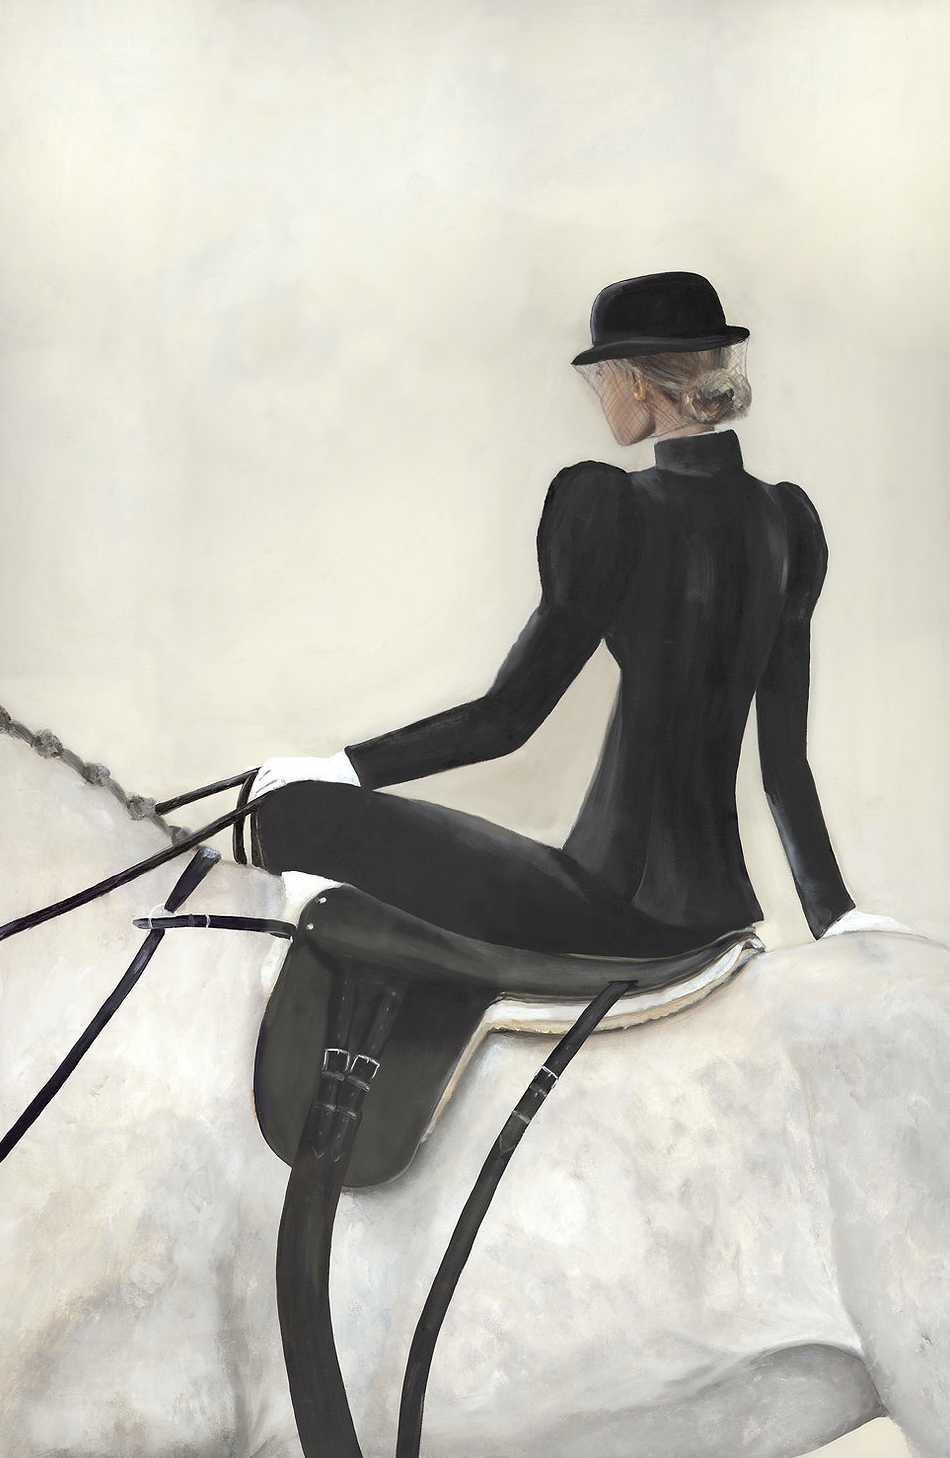 acrylic painting of a blonde woman in a hunting habit riding side saddle on a grey horse